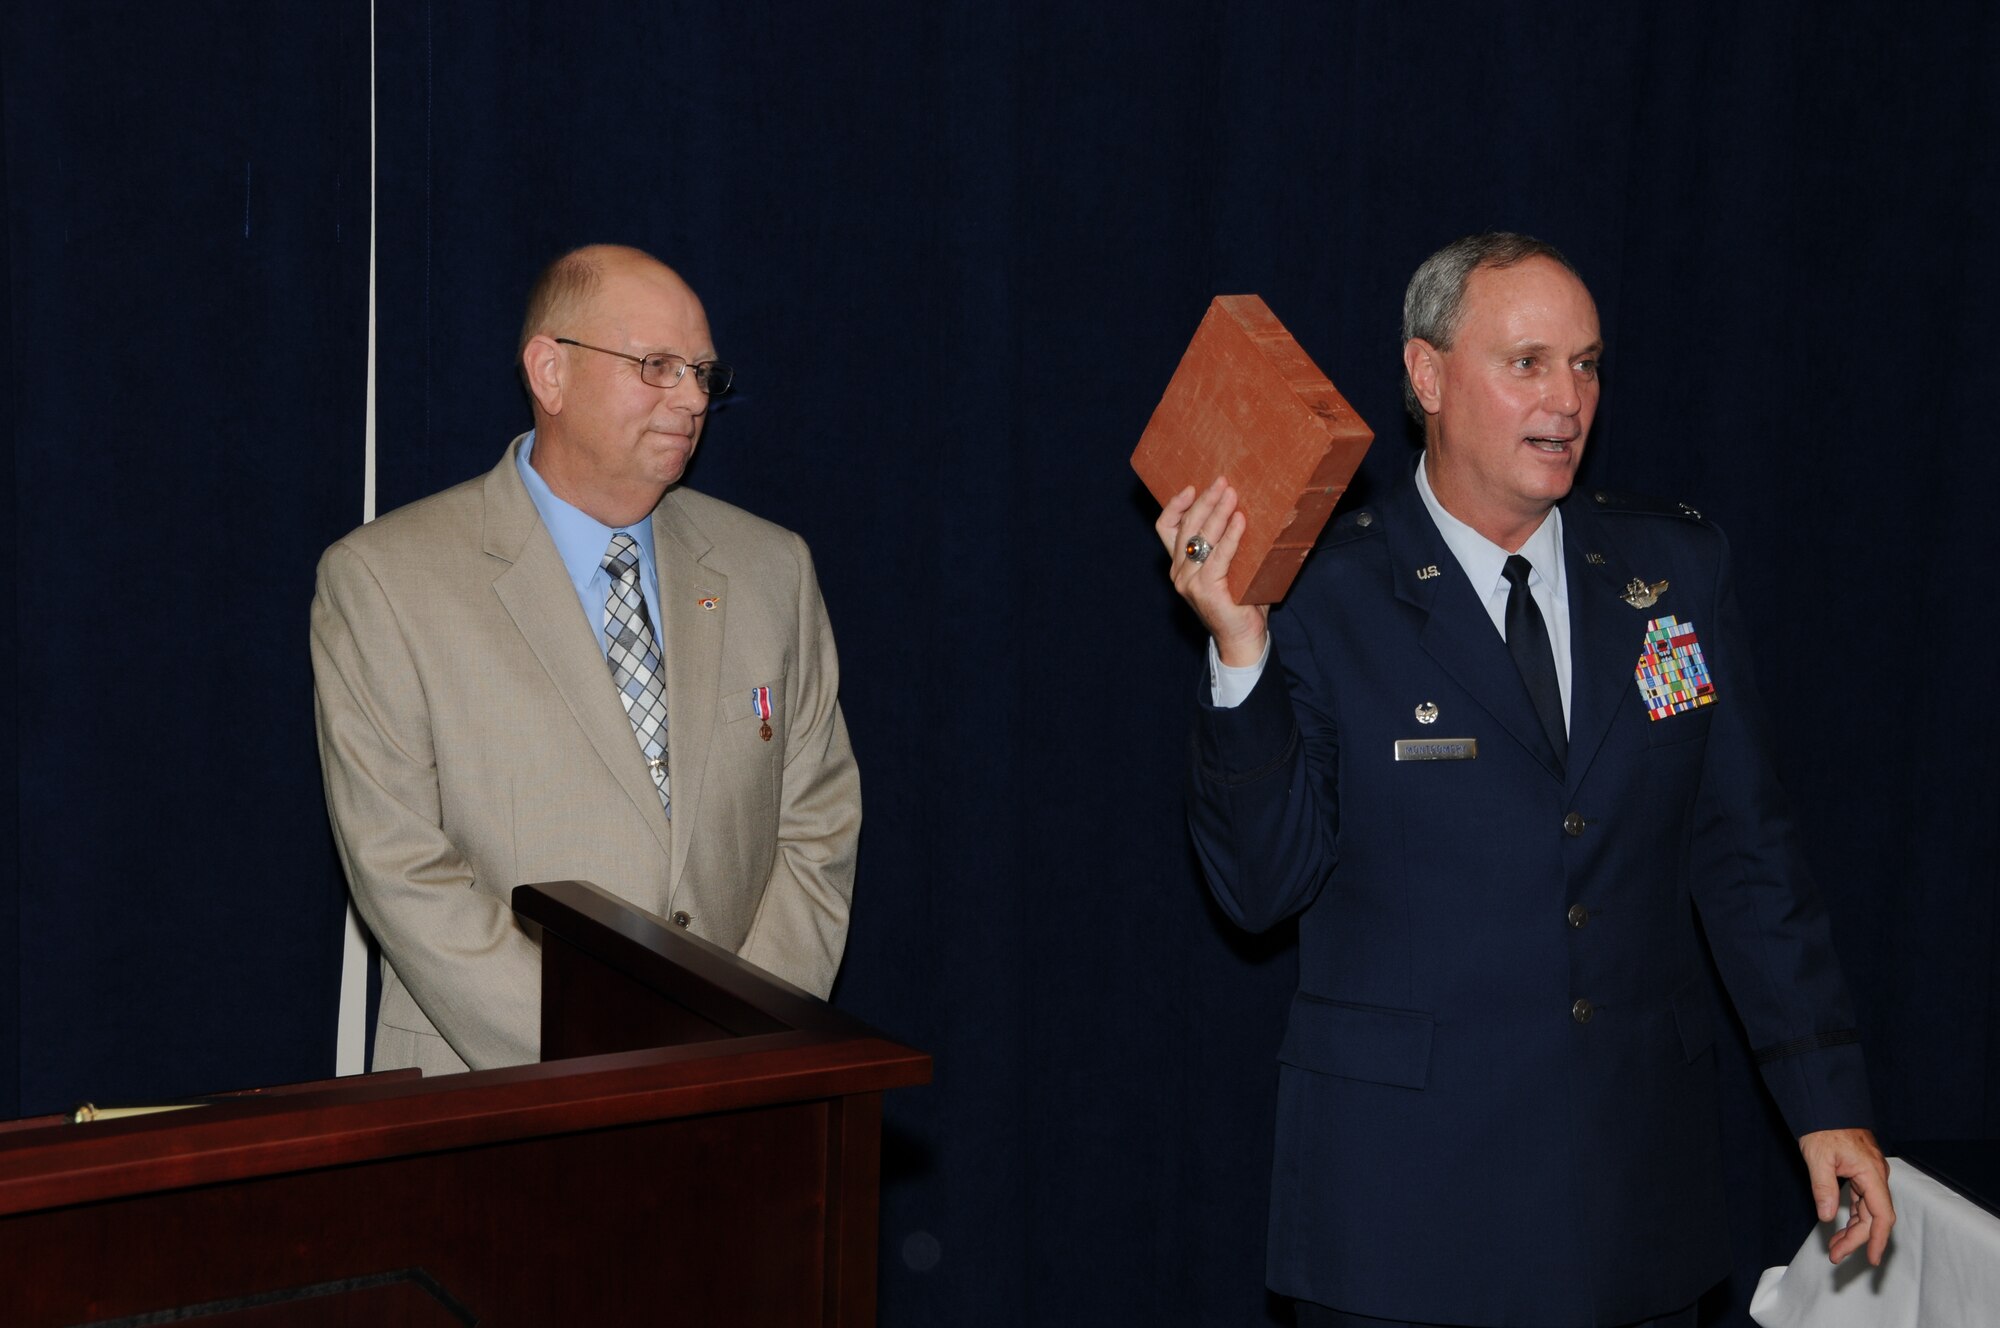 Colonel Harry D. Montgomery, 164th Airlift Wing Commander, presents a commemorative retiree brick that will encircle the historic fountain on base to Lieutenant Colonel Lamar Spencer during Col Spencer's retirement ceremony.